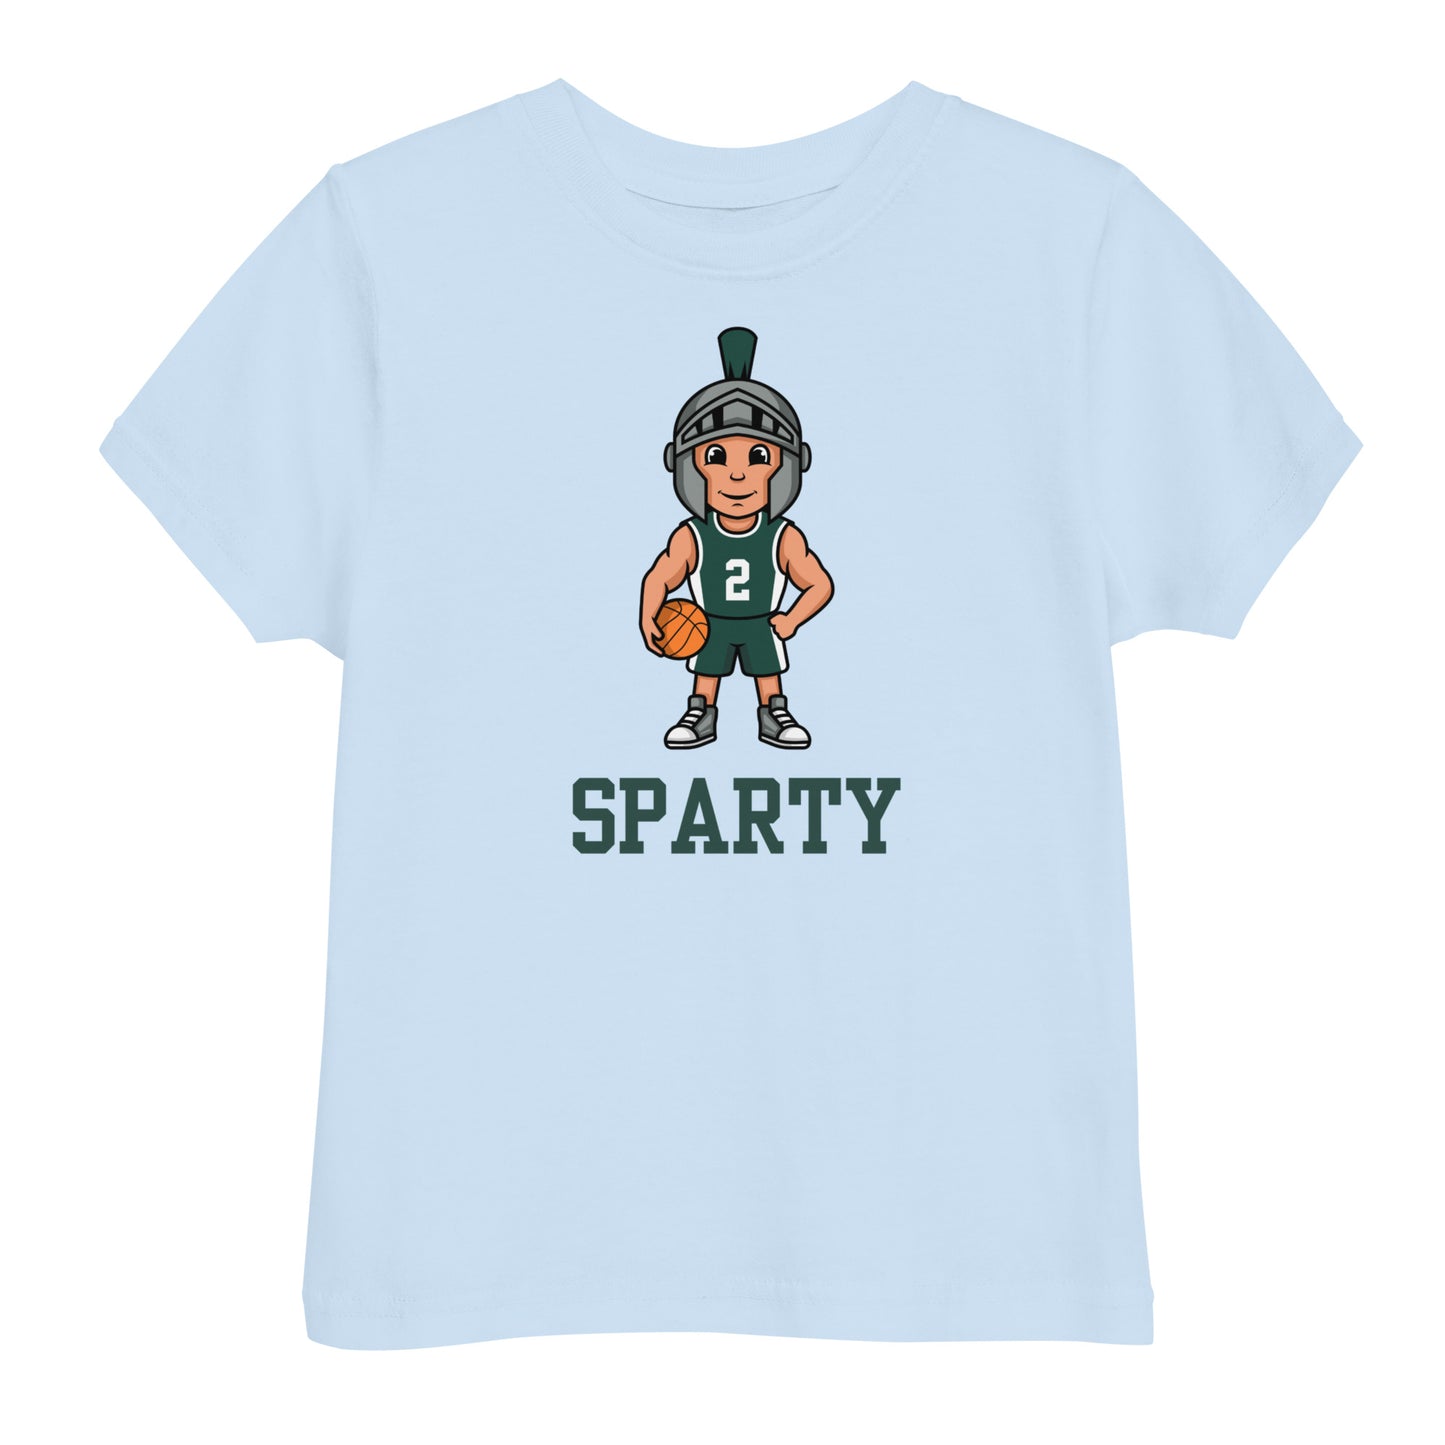 Sparty Toddler jersey t-shirt